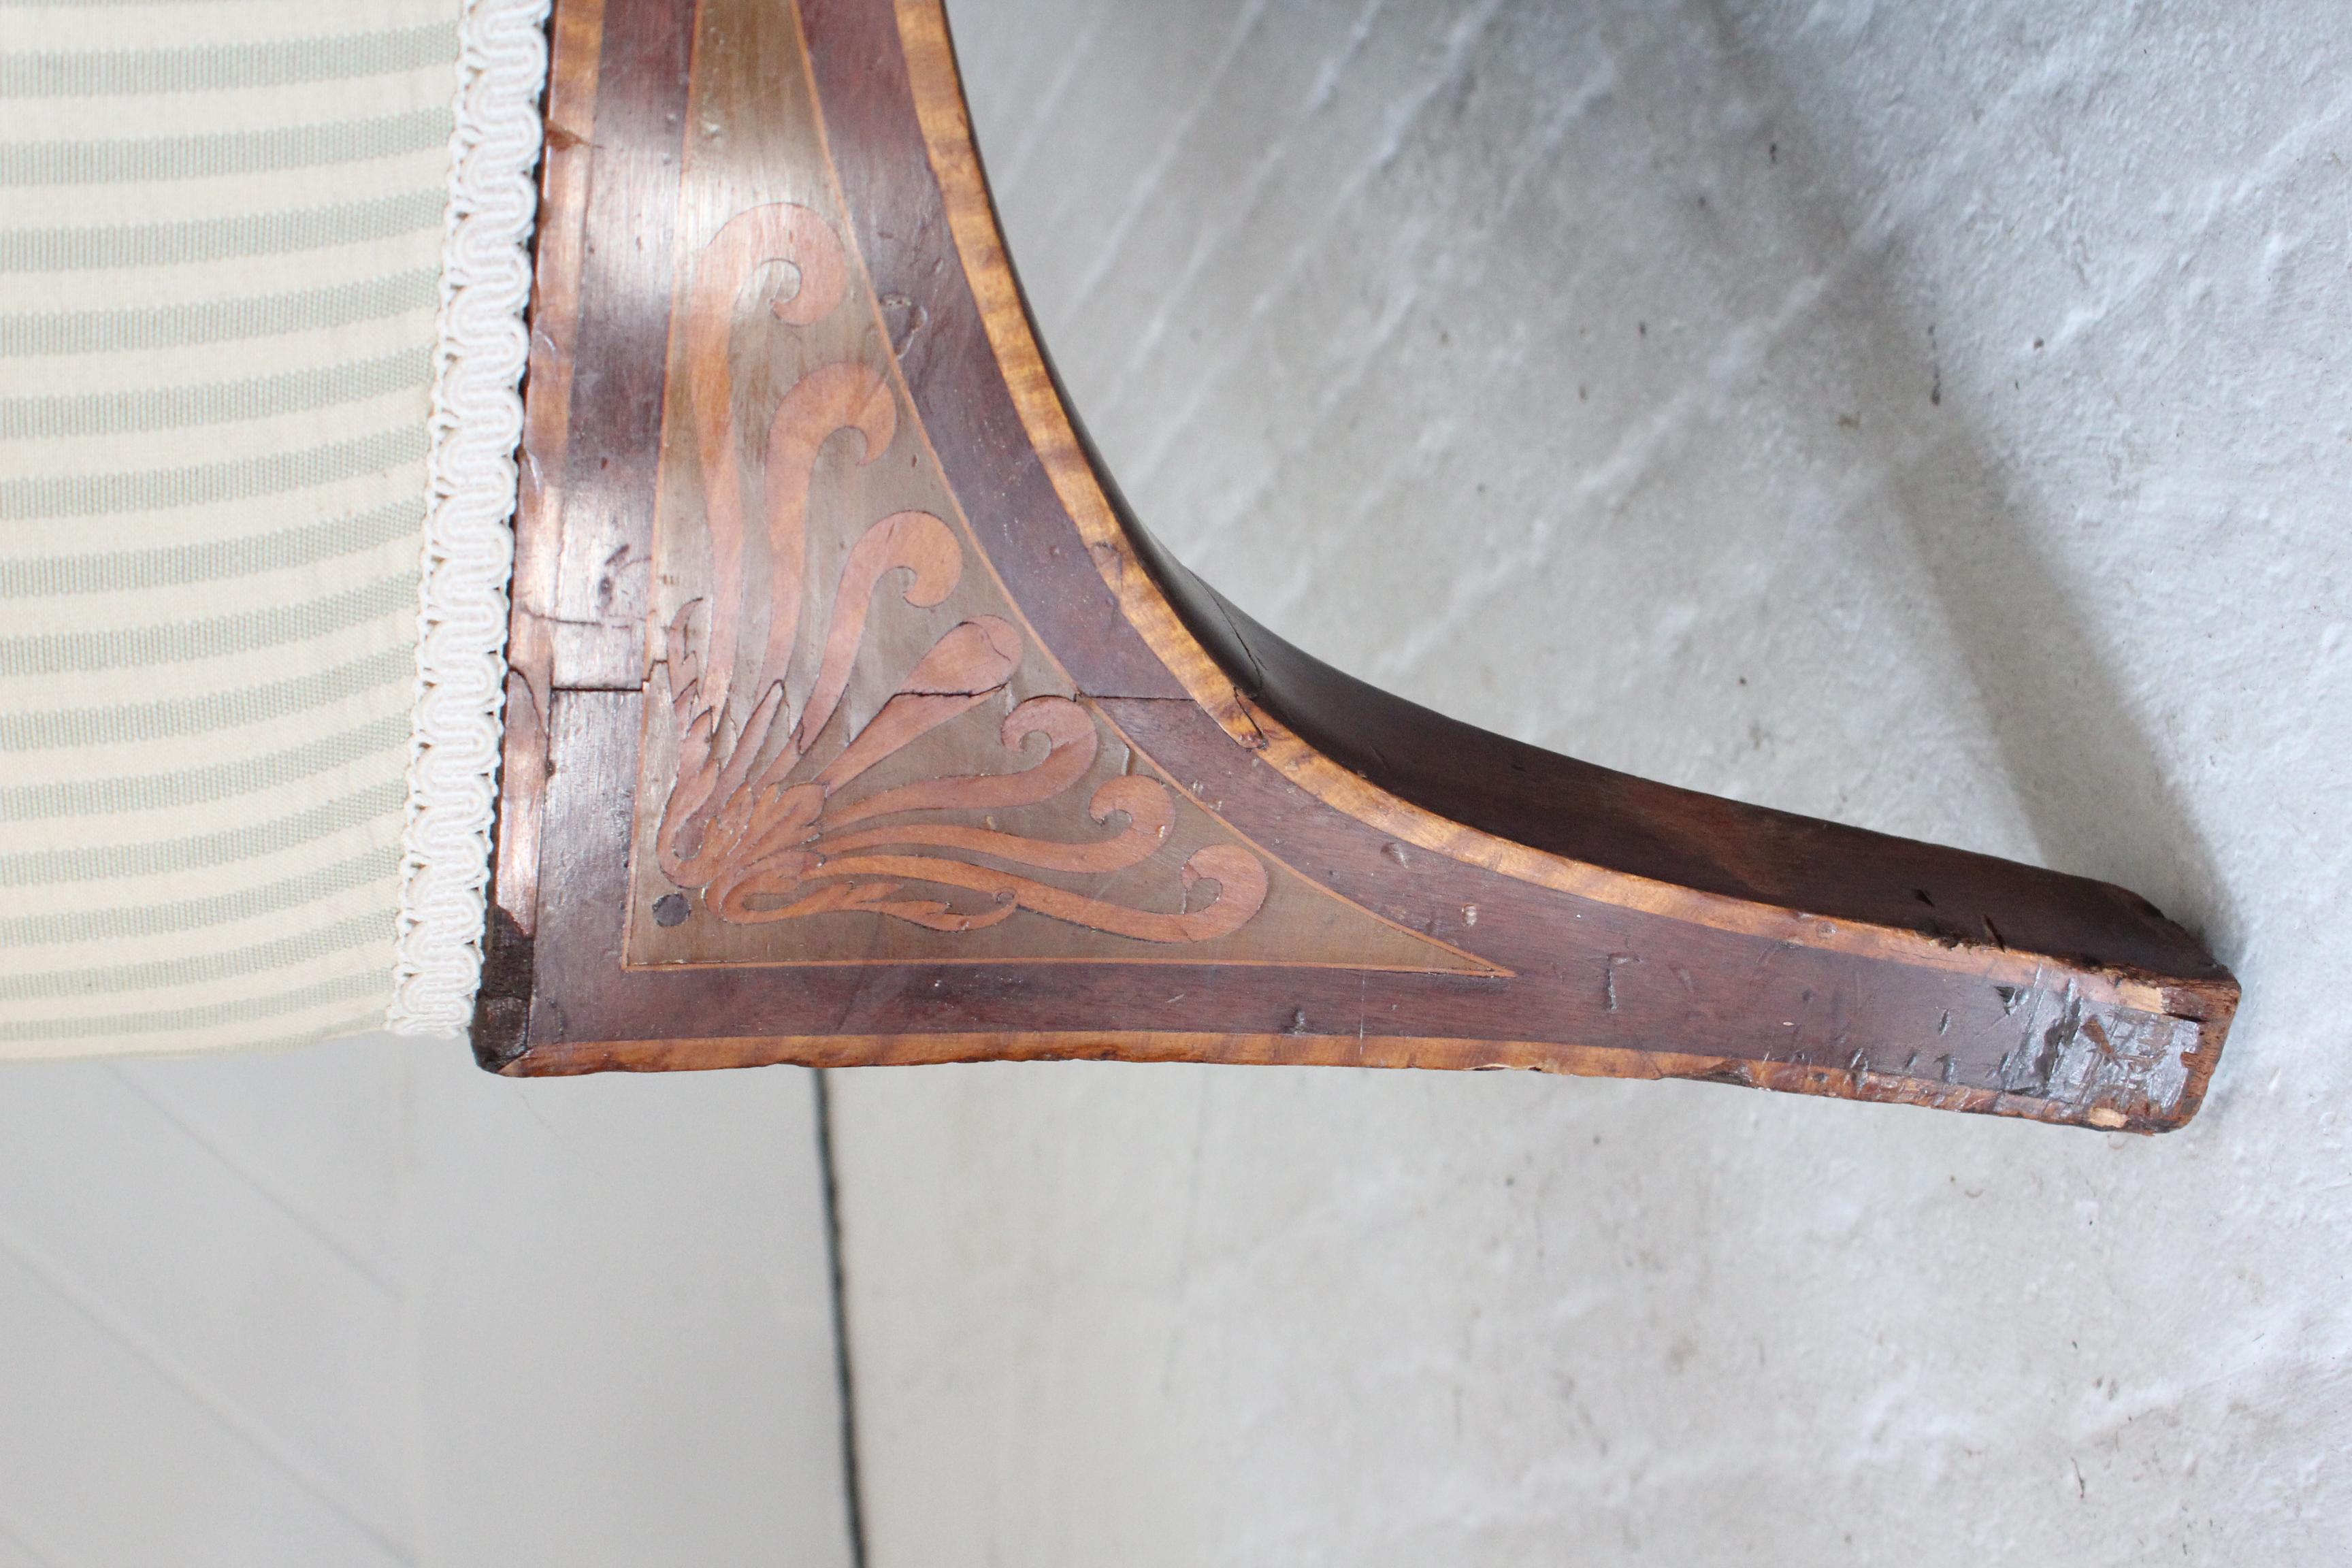 Victorian Settee With Inlay Decoration In Good Condition For Sale In Petworth, GB